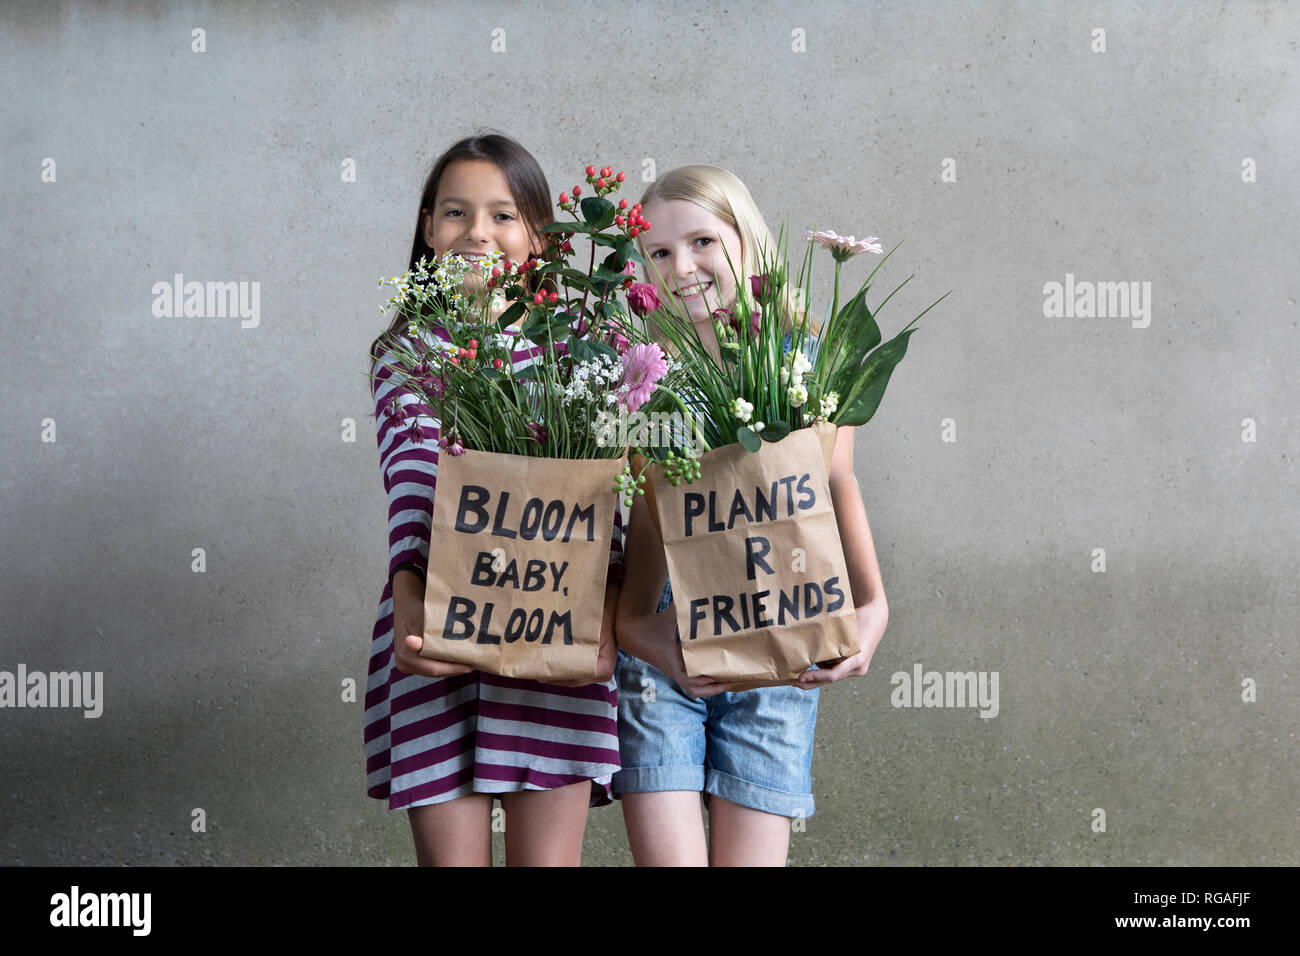 Portrait of two smiling girls standing side by side offering paper bags with flowers Stock Photo